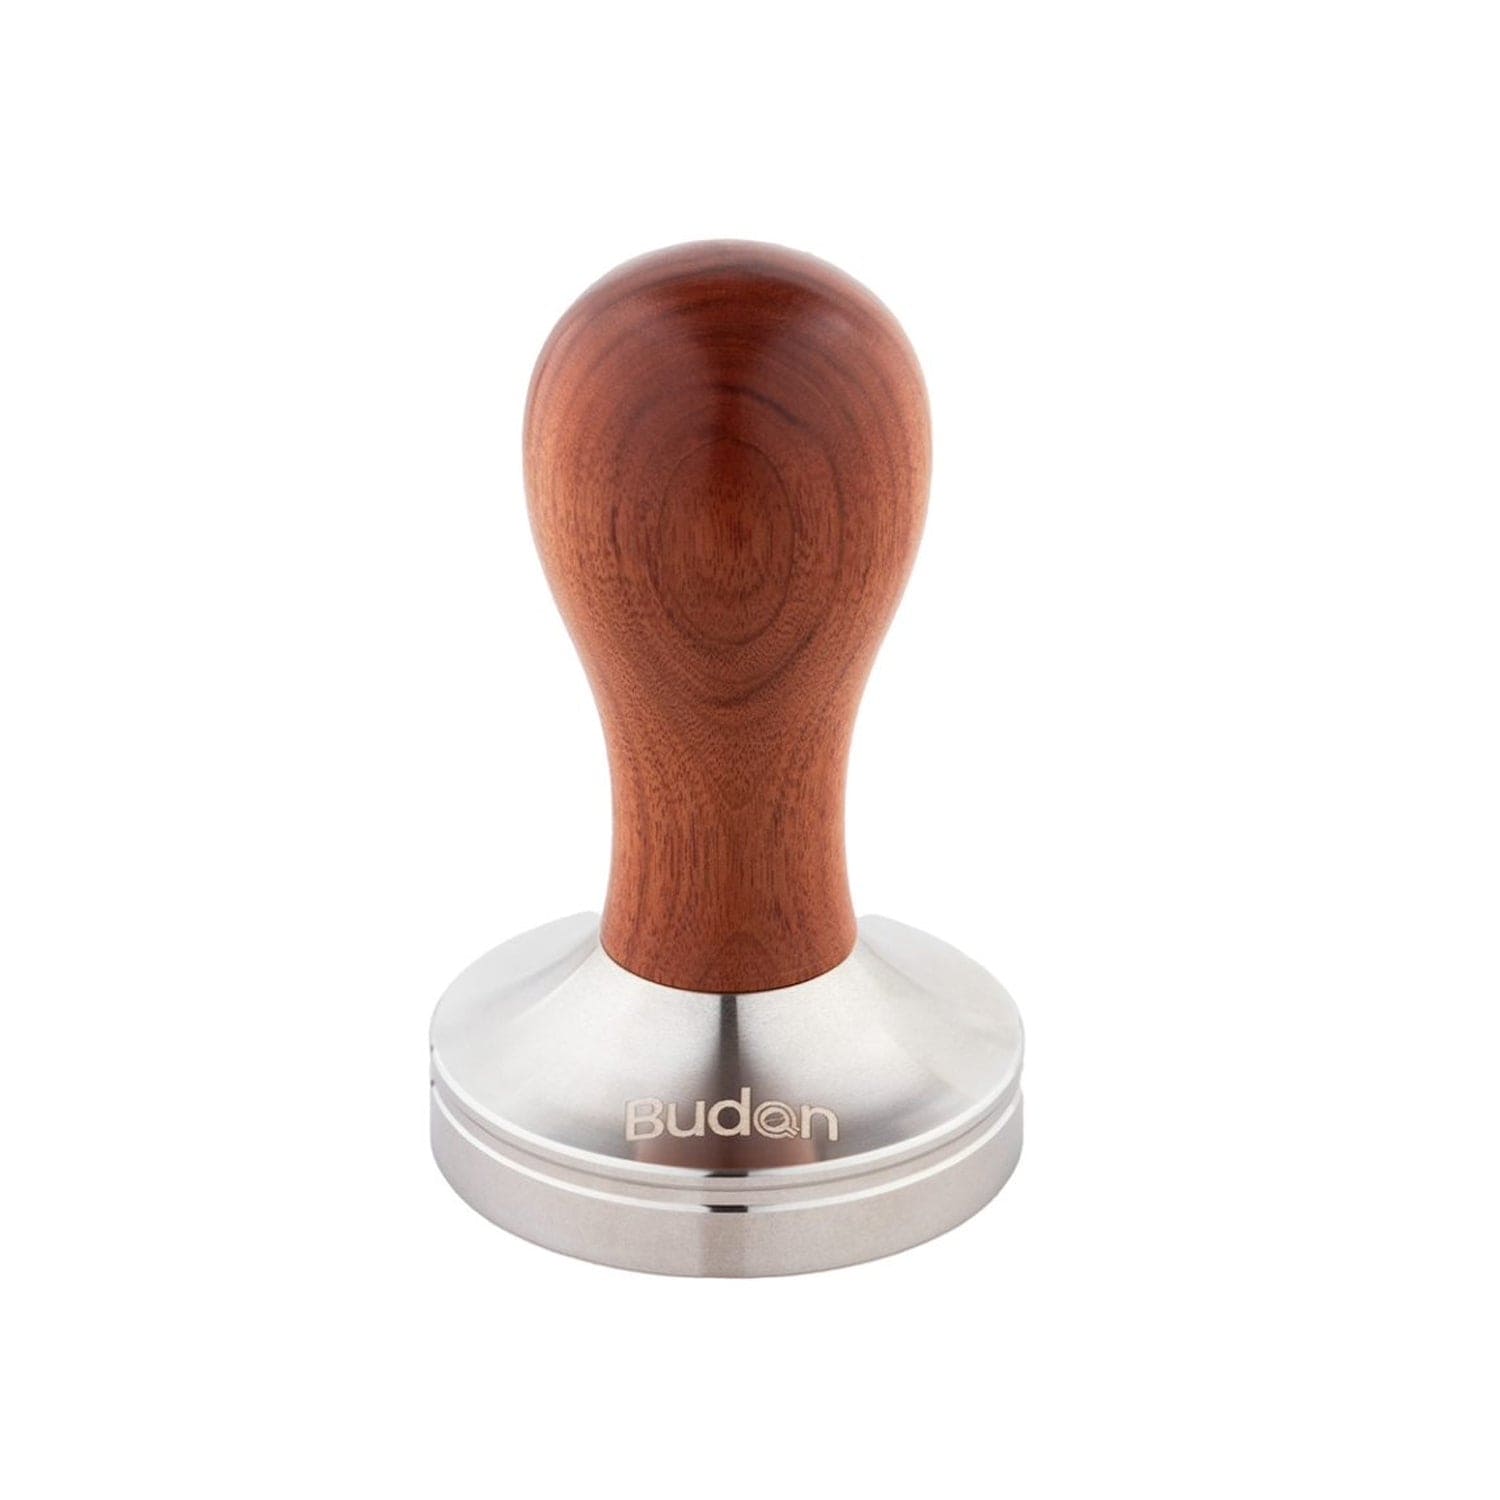 Bezzera Tamper 58mm with wooden handle